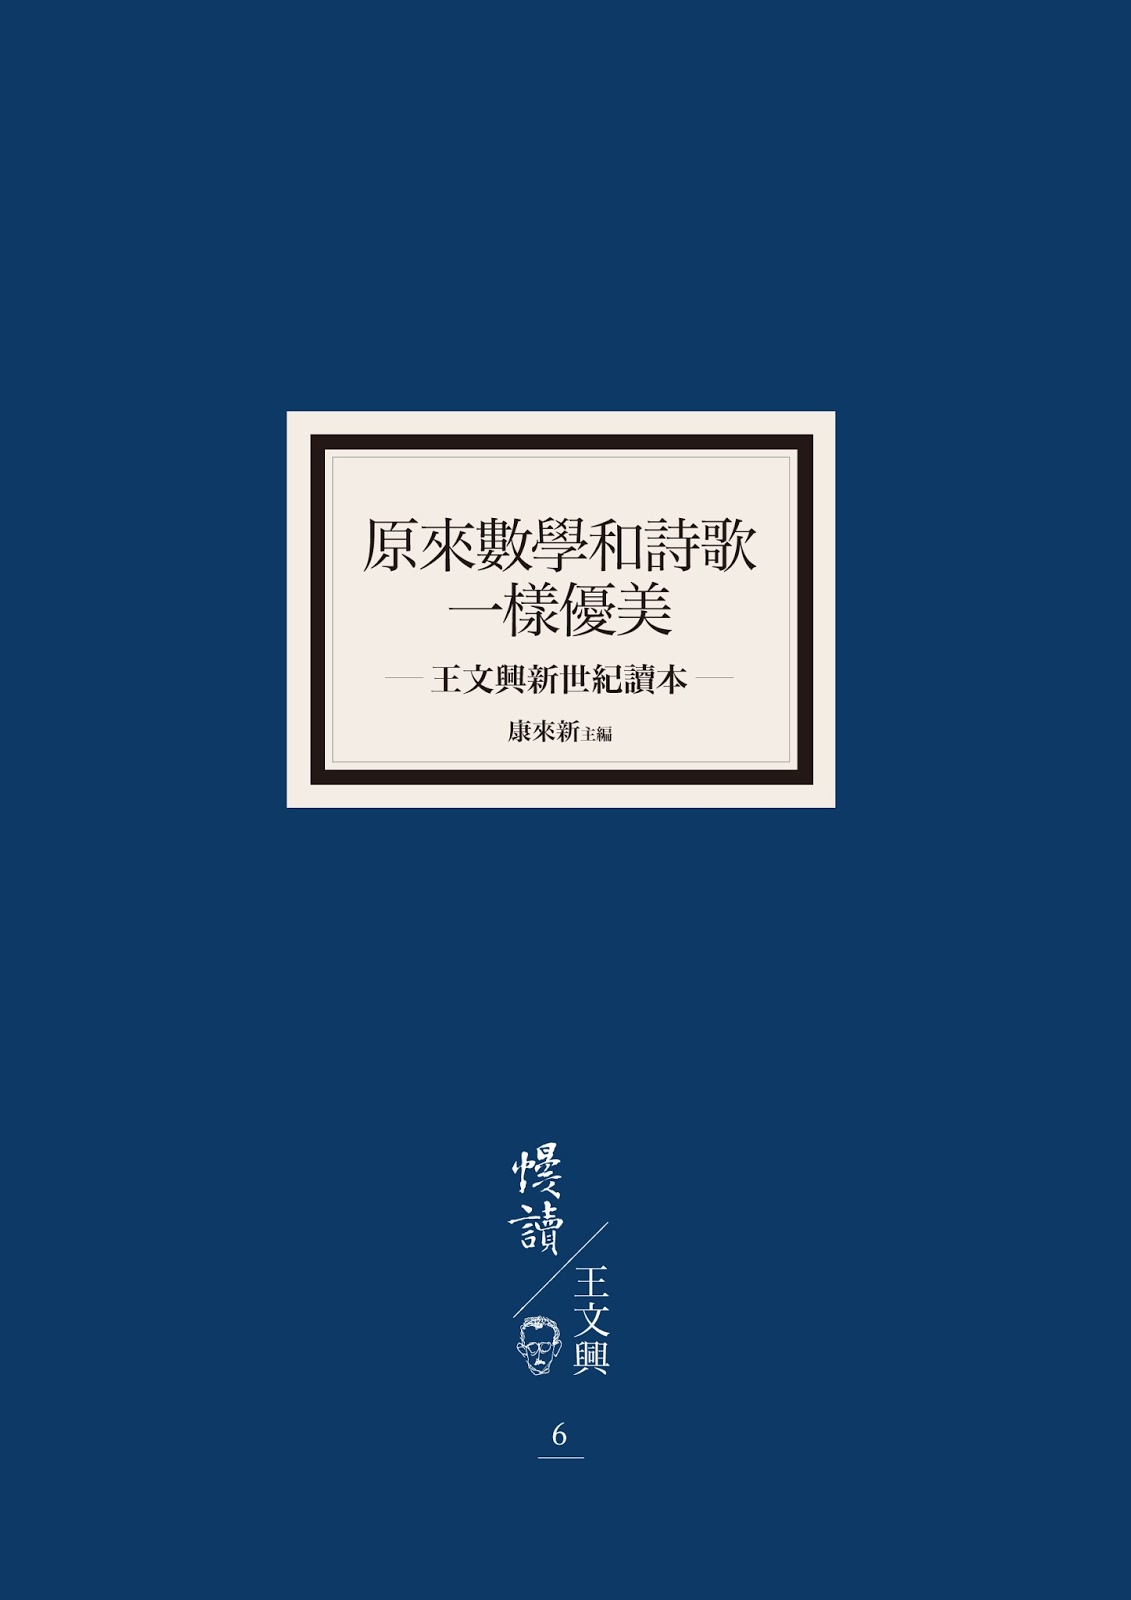 Mathematics and Poetry’s Equal Elegance: A Reader of Wang Wen-hsing in the New Century 《原來數學和詩歌一樣優美――王文興新世紀讀本》(2013)